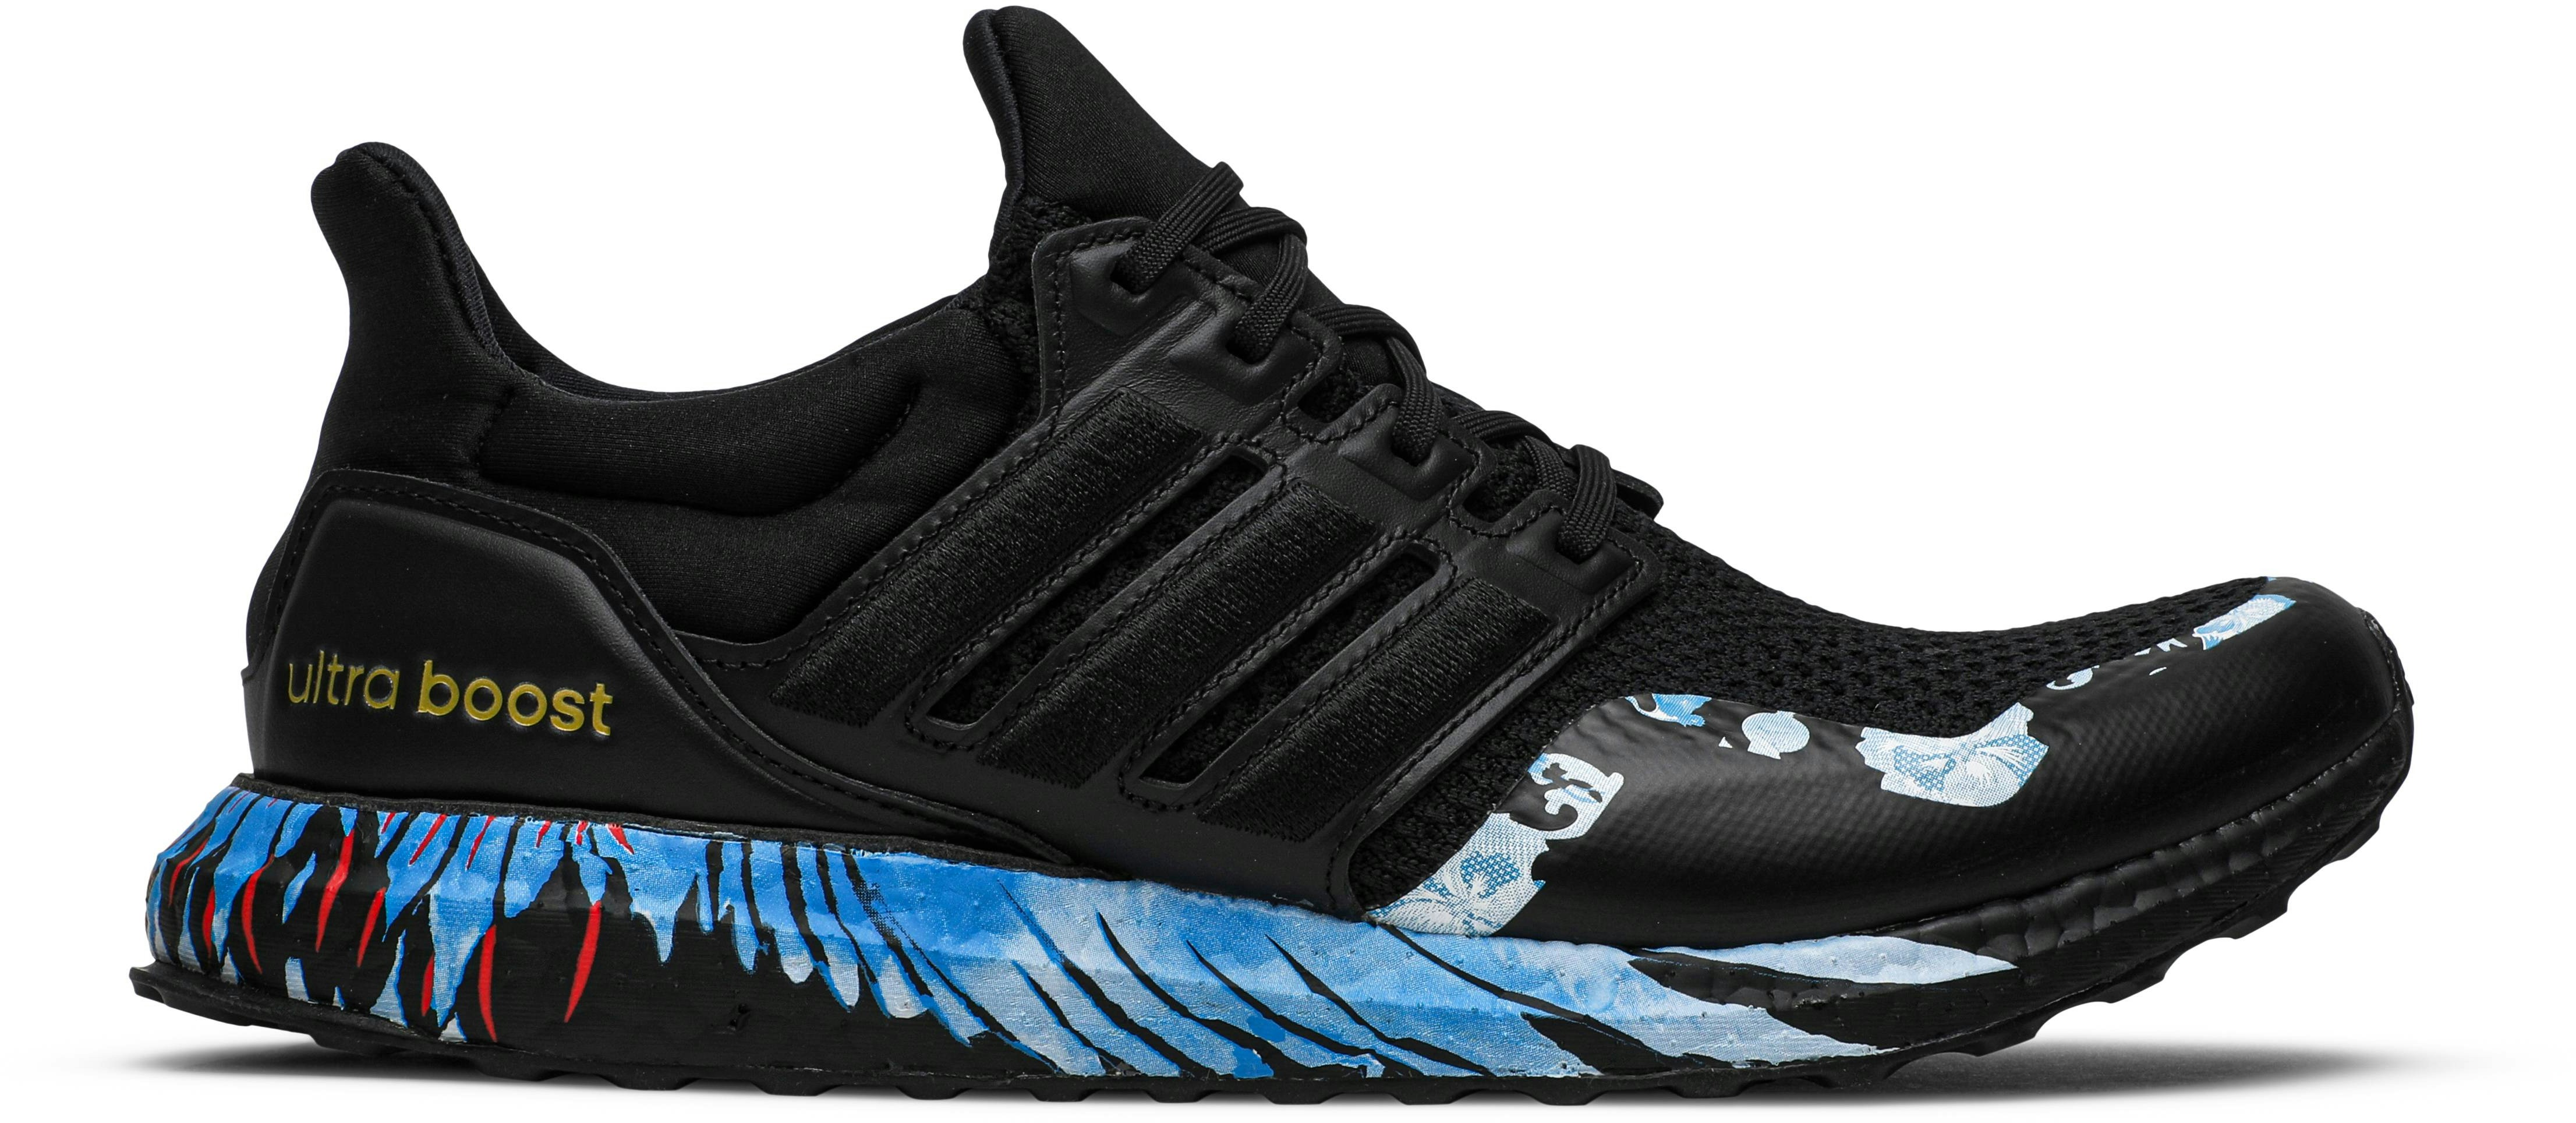 Adidas Ultraboost Dna Chinese New Year ‑ Blue Boost Fw4321 Novelship